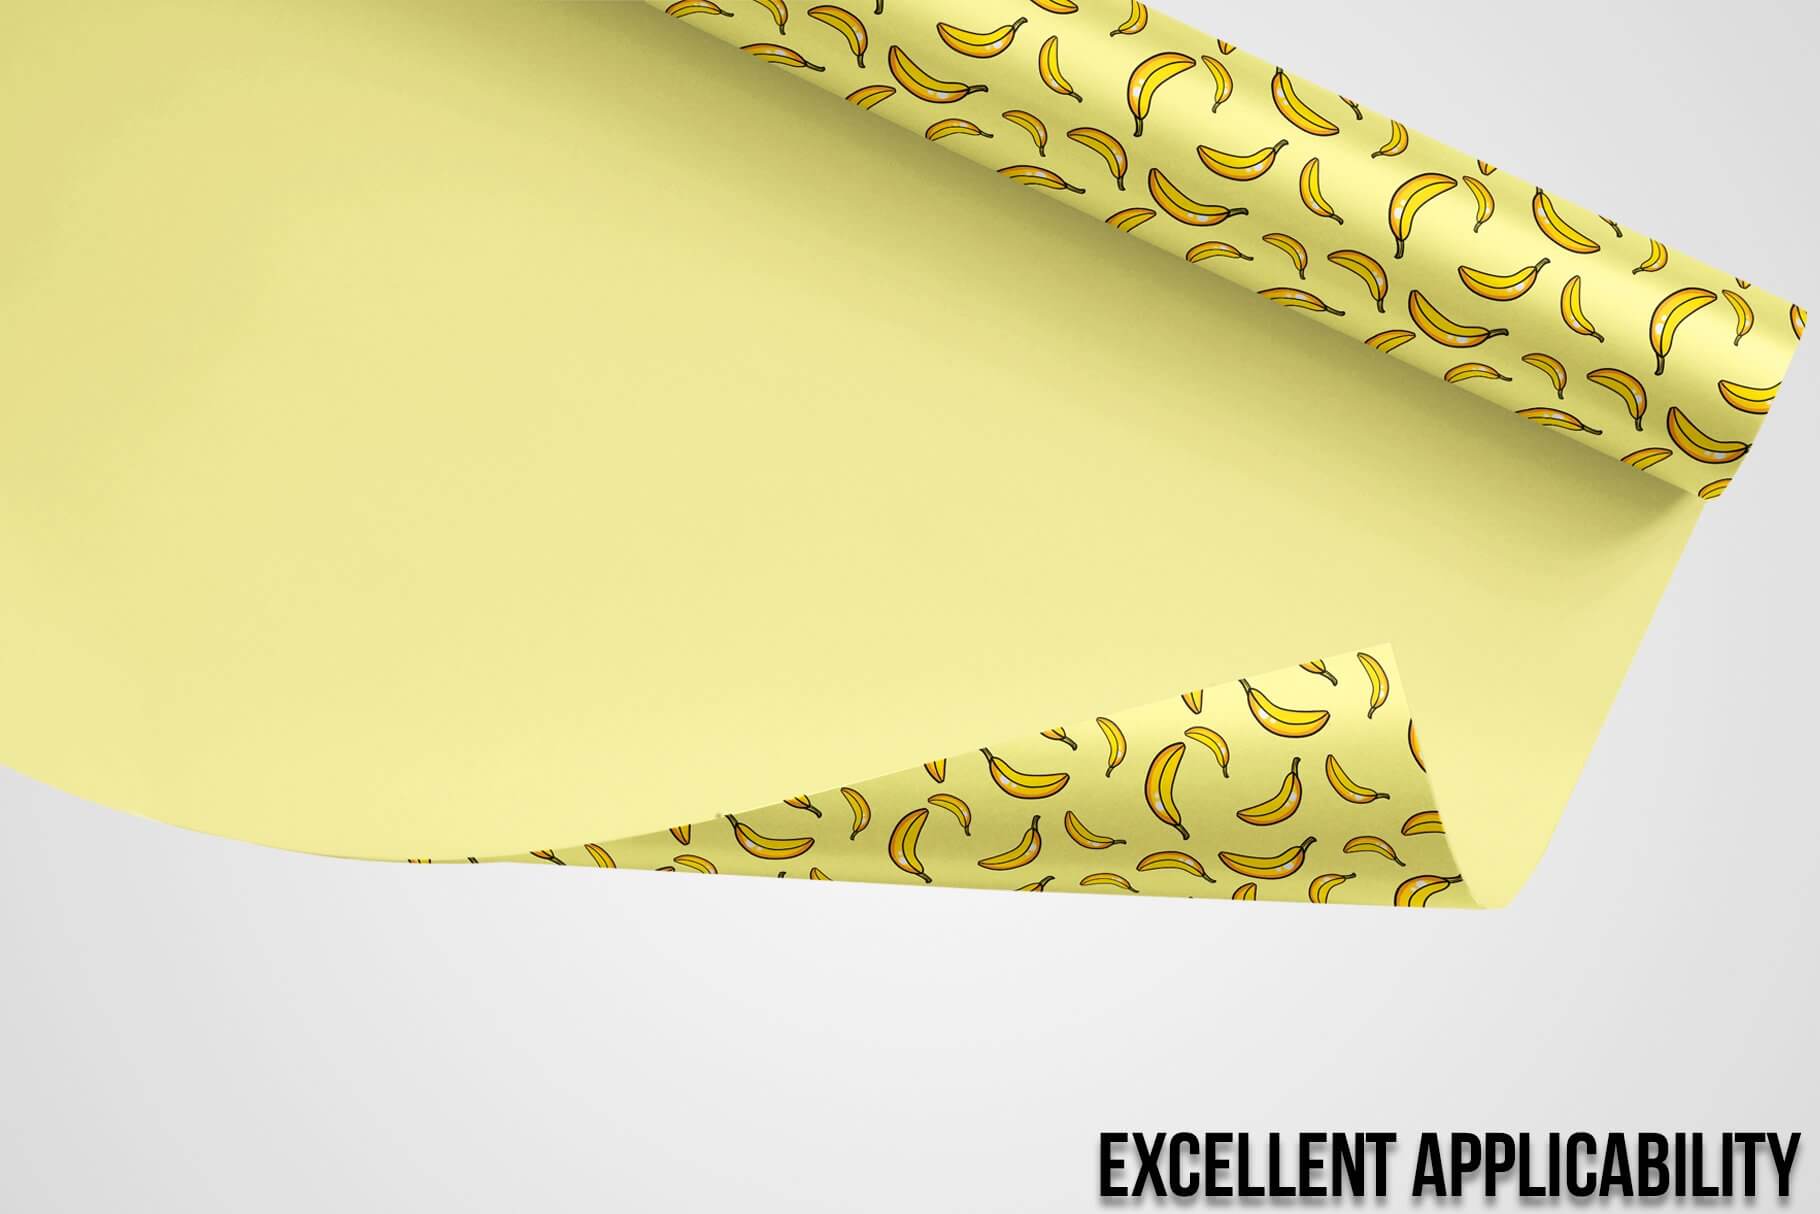 Golden gift paper with banana image.